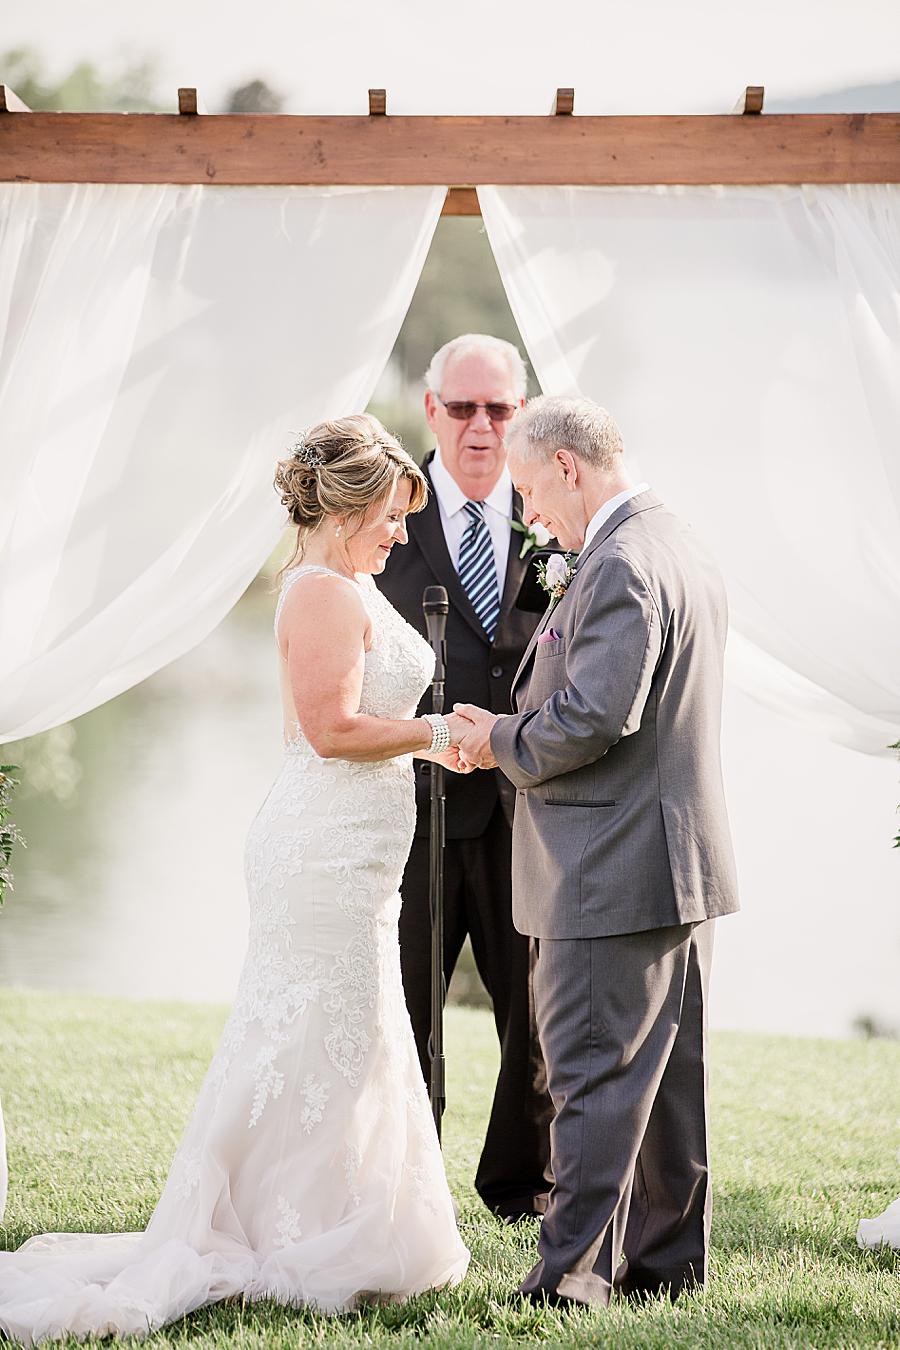 Exchanging rings at this intimate WindRiver wedding by Knoxville Wedding Photographer Amanda May Photos.